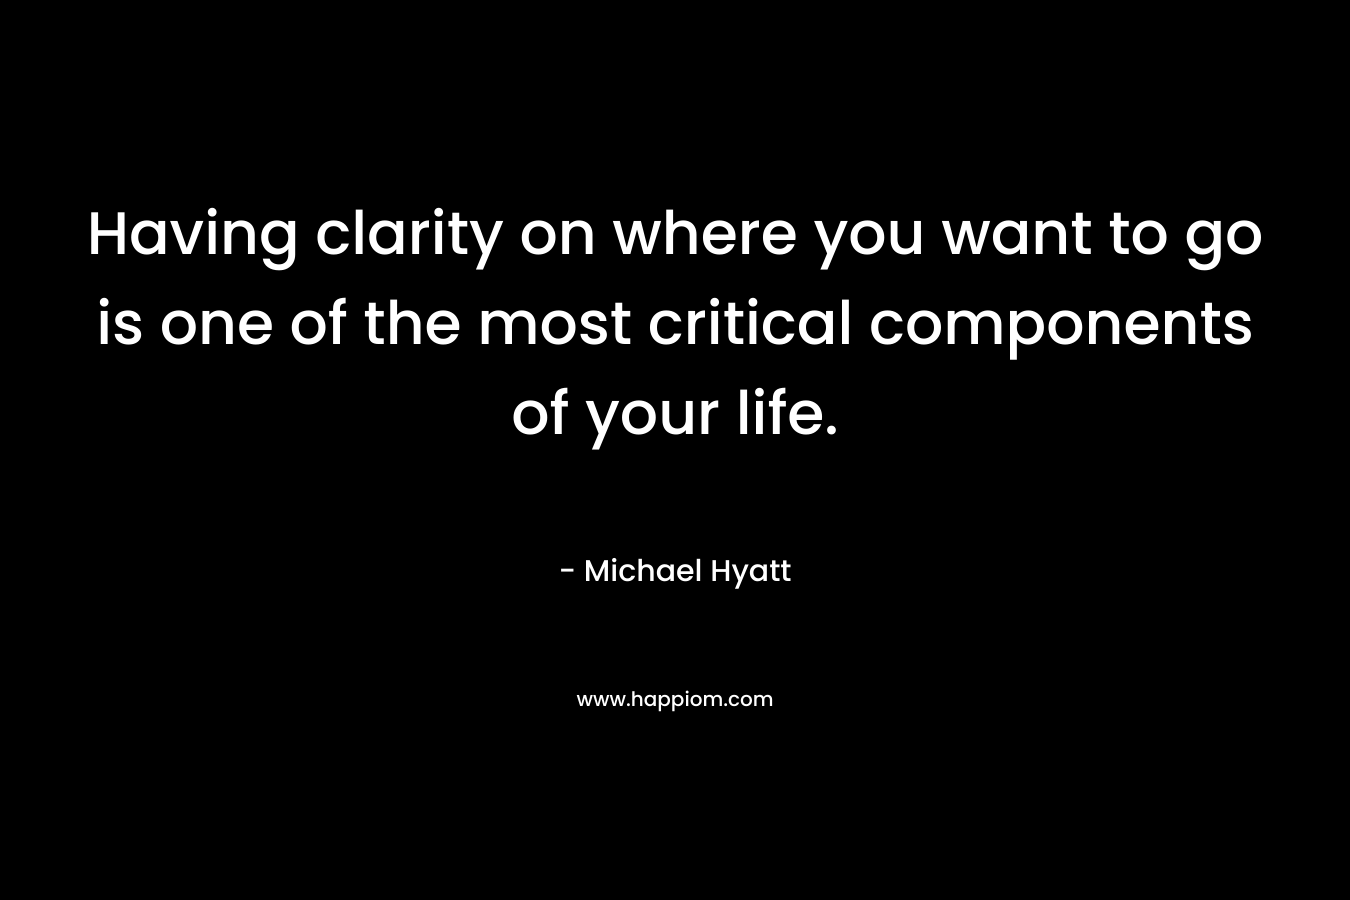 Having clarity on where you want to go is one of the most critical components of your life. – Michael Hyatt